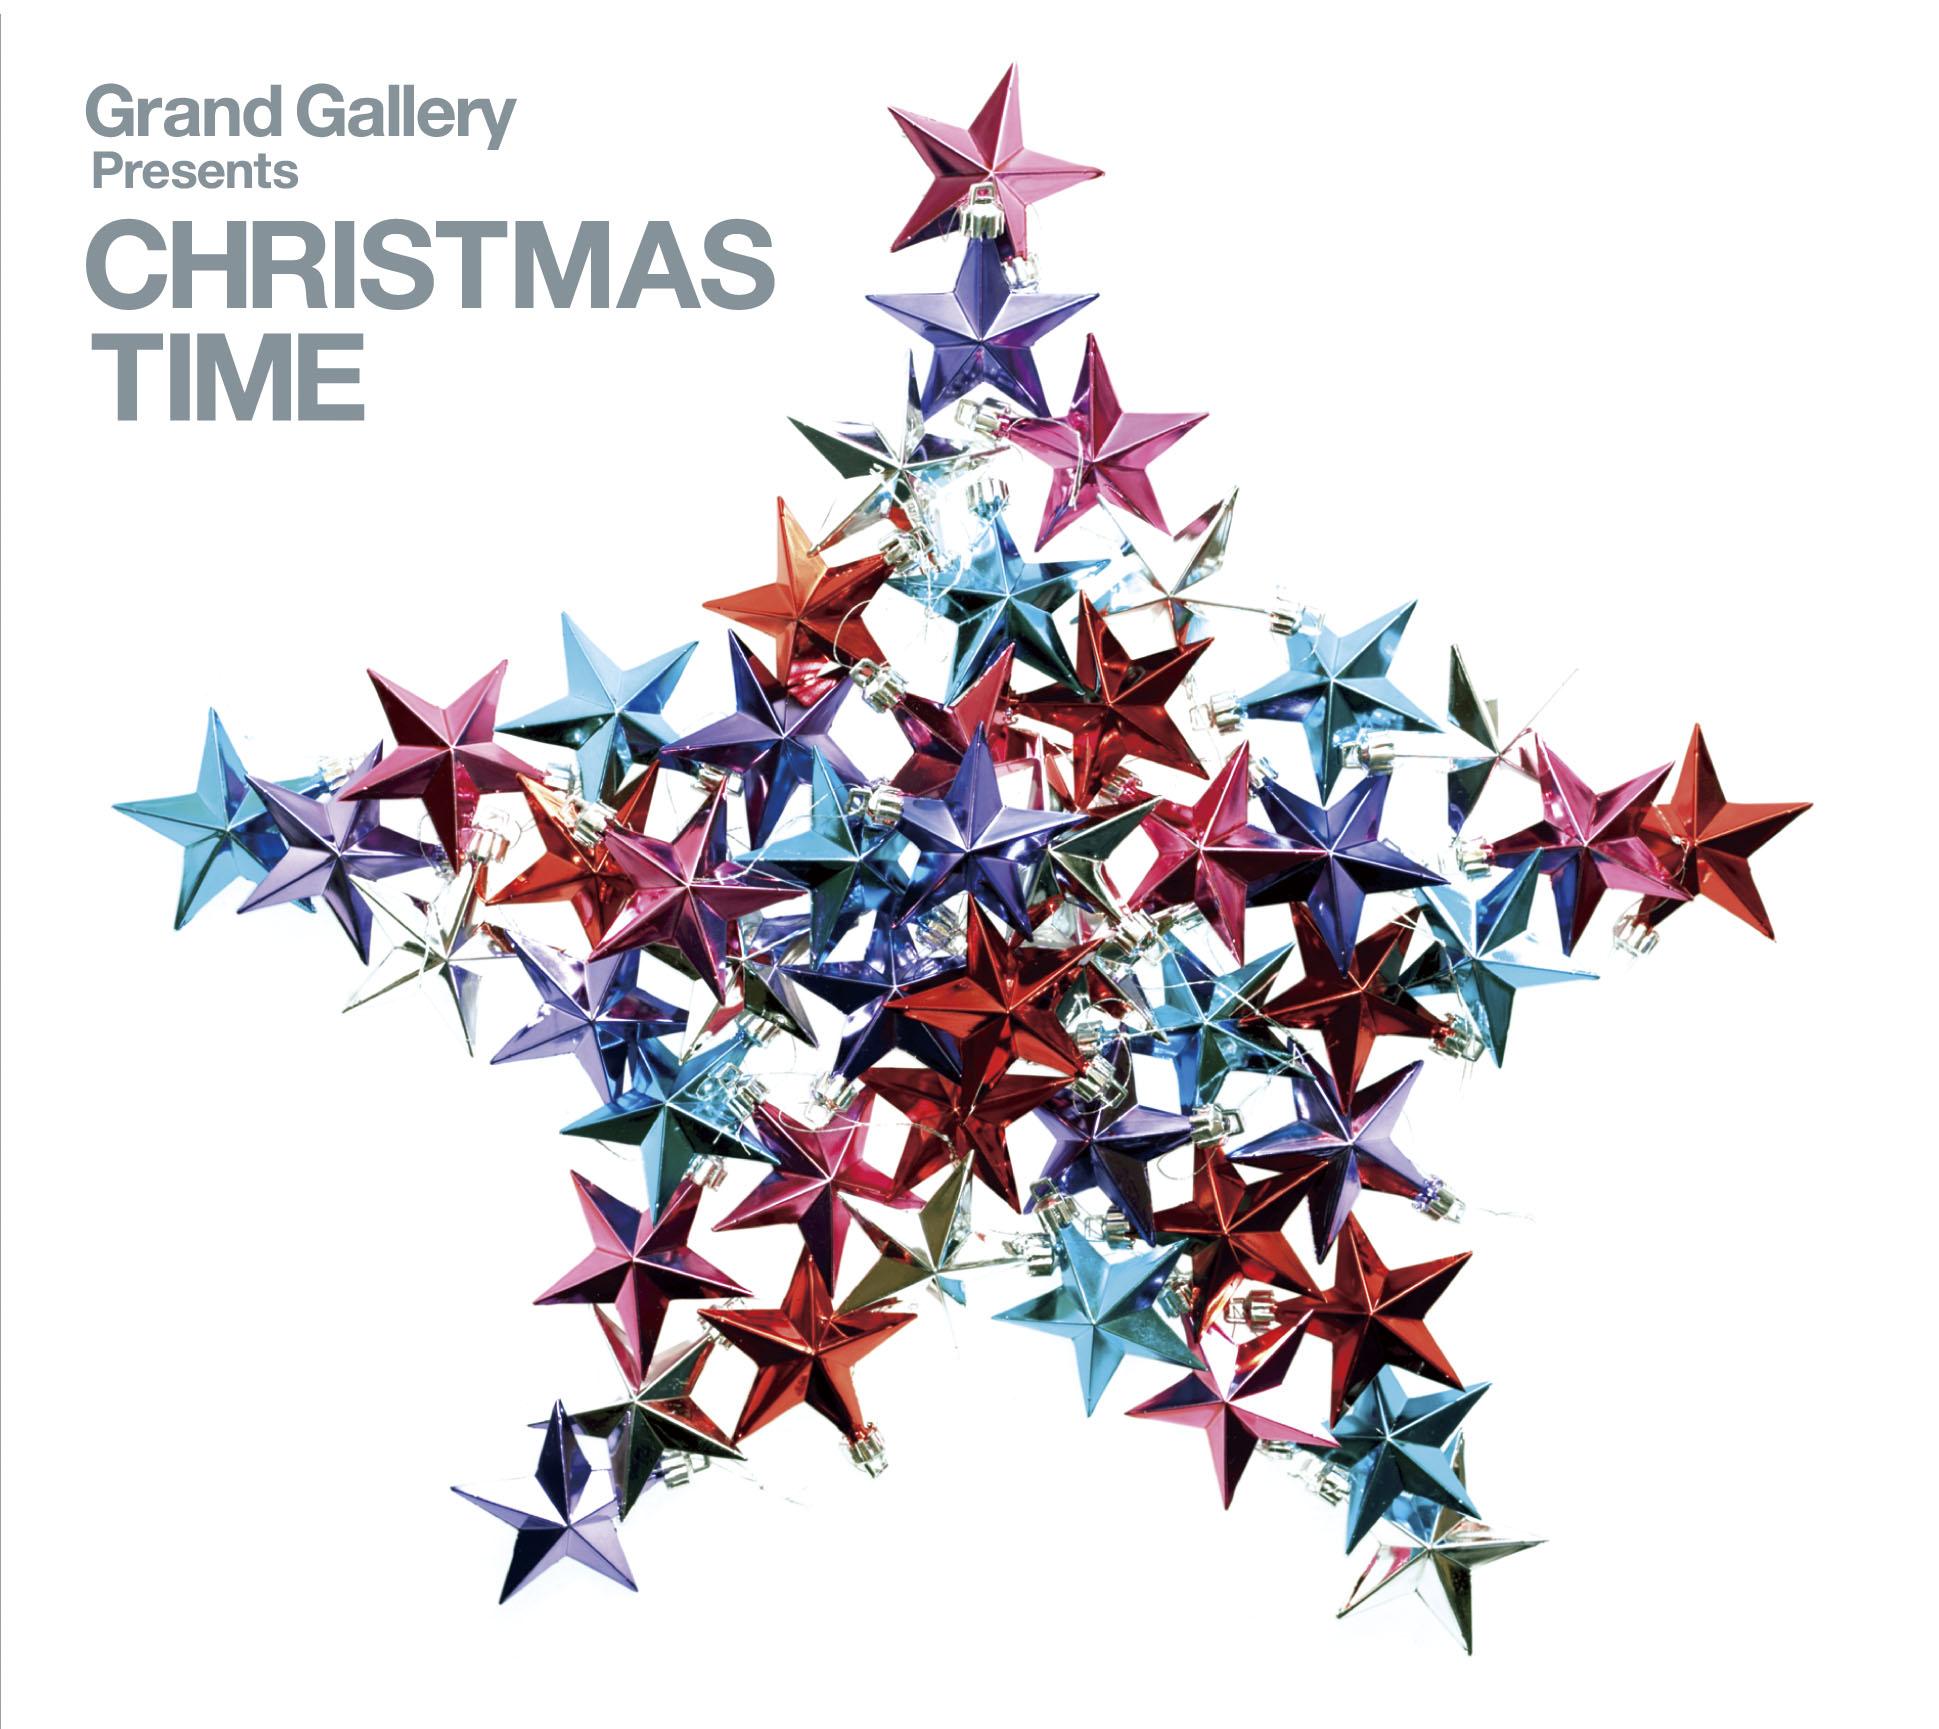 Grand Gallery PRESENTS:CHRISTMAS TIME